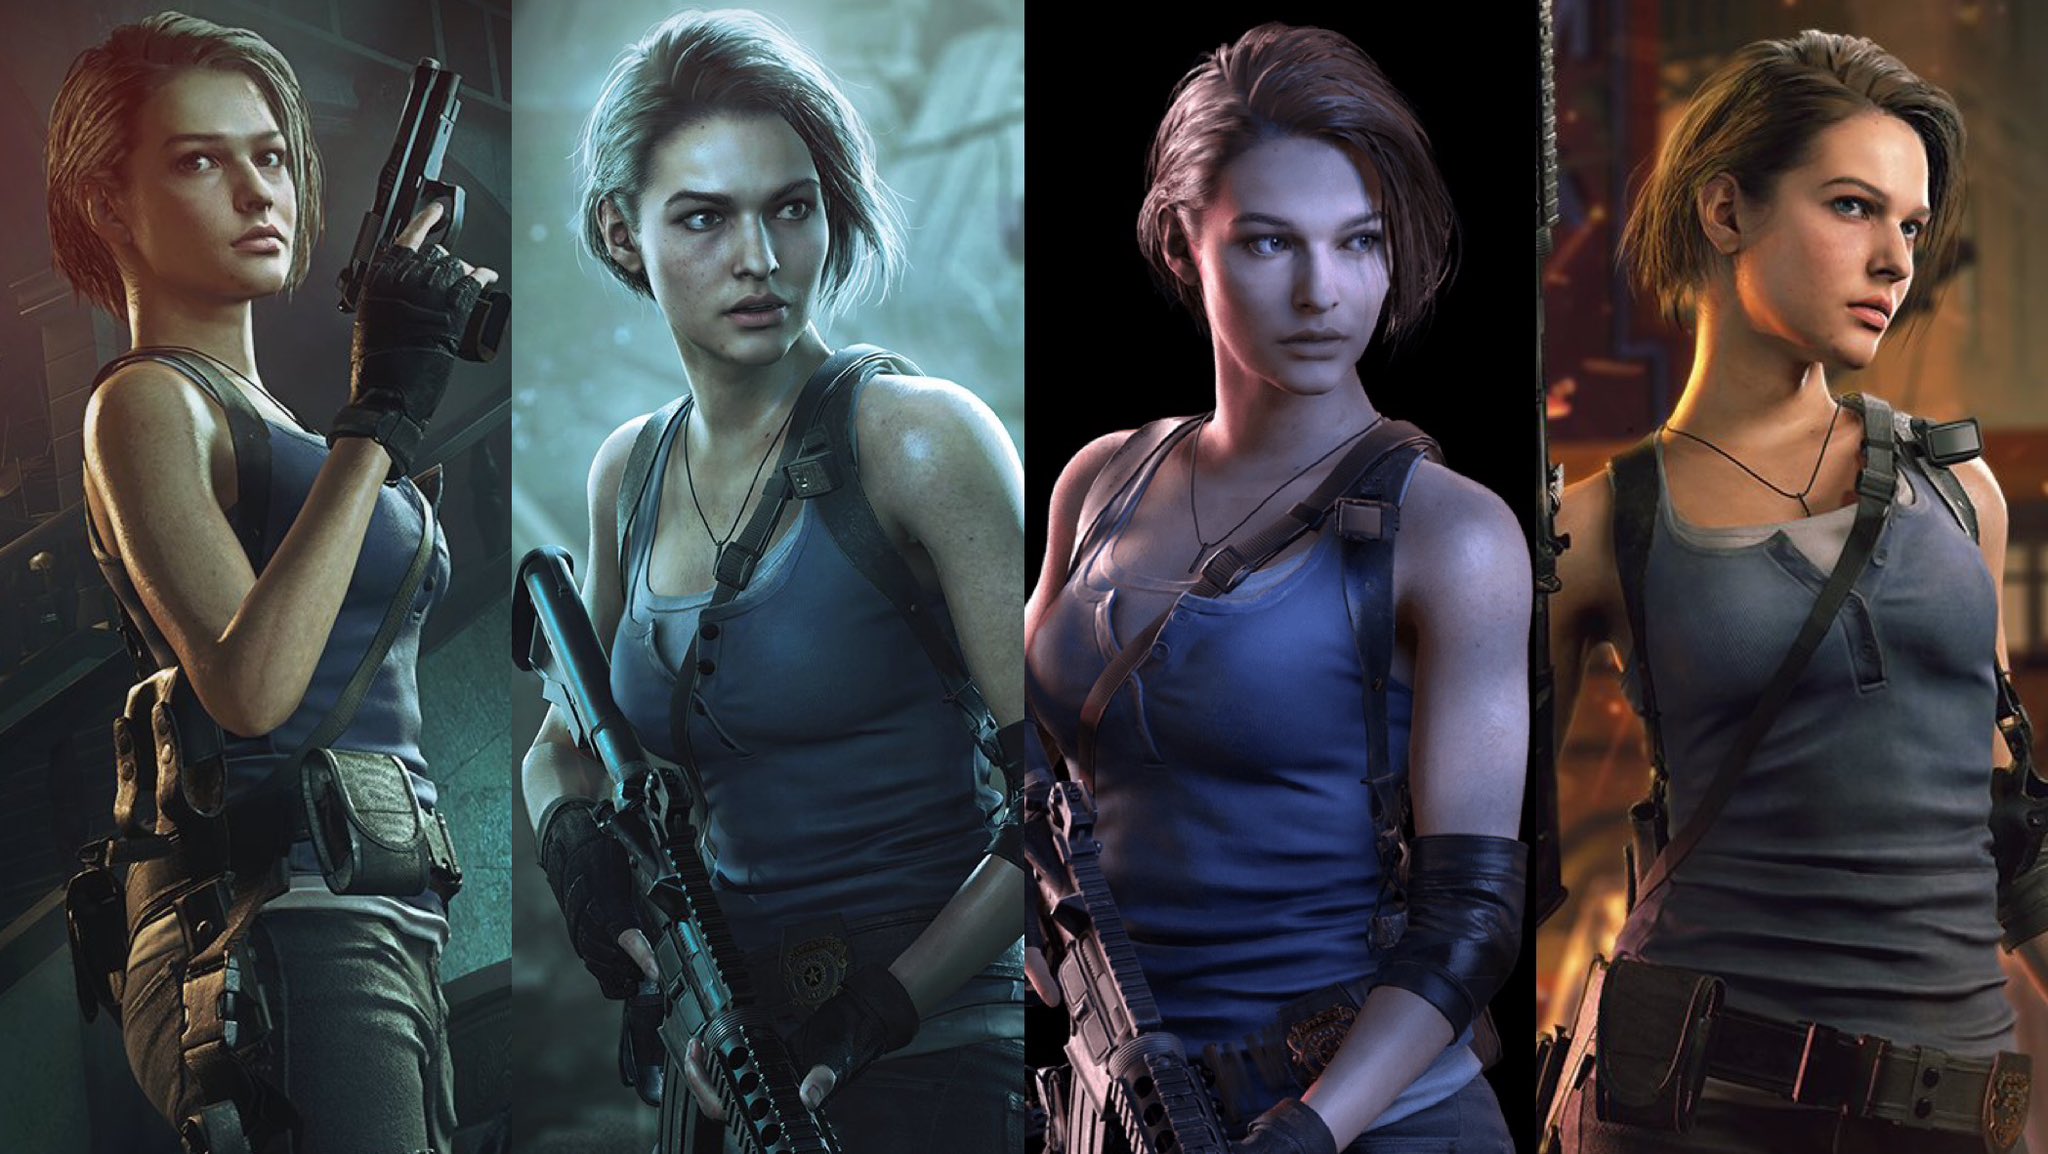 Jill Valentine Since 1996 on X: Officially Ashley's character